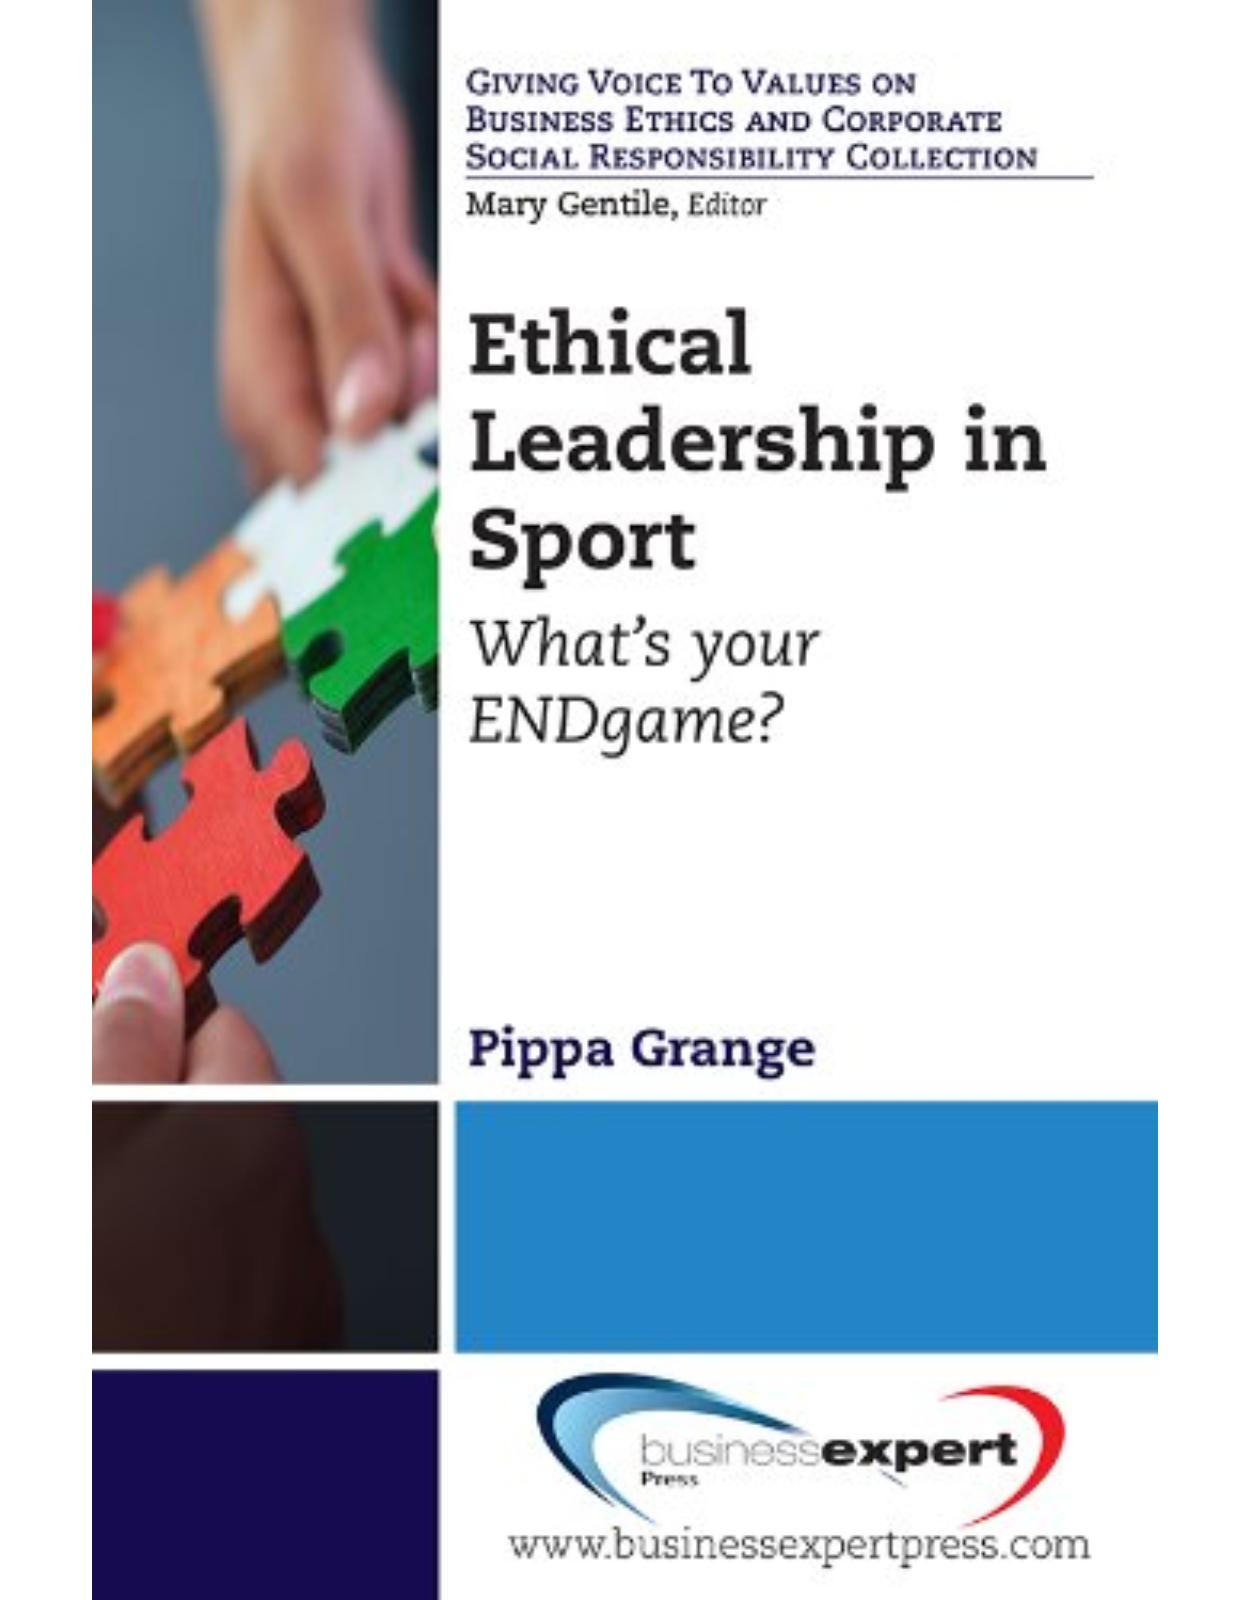 Ethical Leadership in Sport: What's Your End Game? (Giving Voice to Values on Business Ethics and Corporate Social Responsibility) 